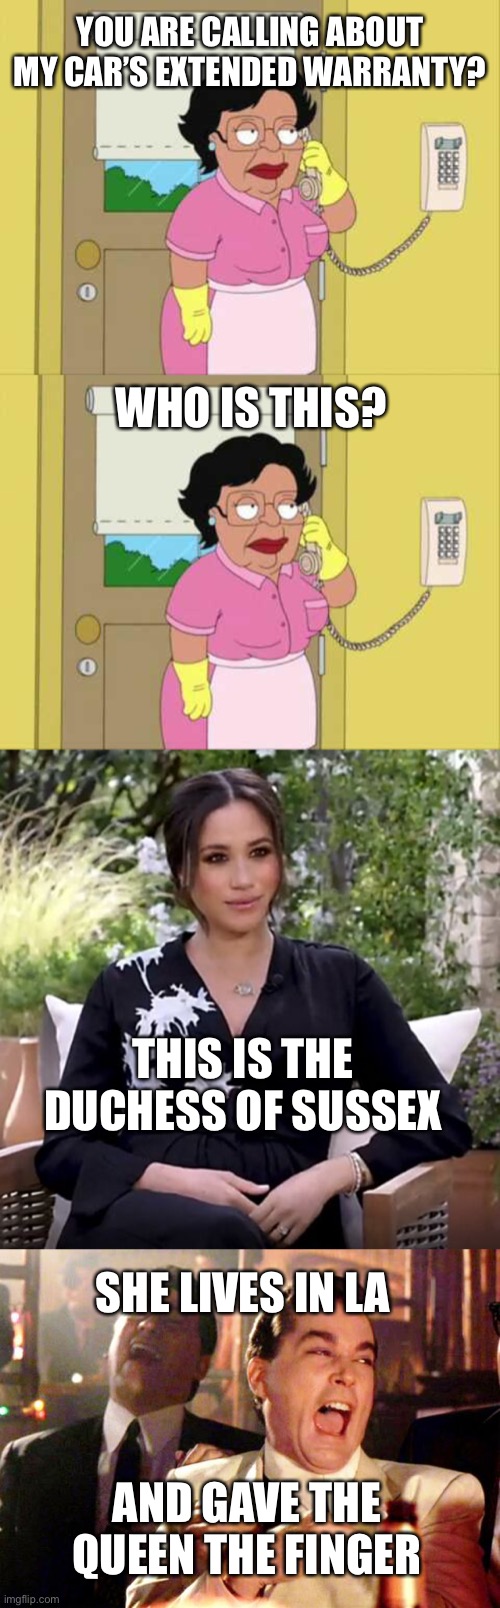 Cold calling Senators? |  YOU ARE CALLING ABOUT MY CAR’S EXTENDED WARRANTY? WHO IS THIS? THIS IS THE DUCHESS OF SUSSEX; SHE LIVES IN LA; AND GAVE THE QUEEN THE FINGER | image tagged in memes,consuela,megan markle oprah,goodfellas laugh,cold calling | made w/ Imgflip meme maker